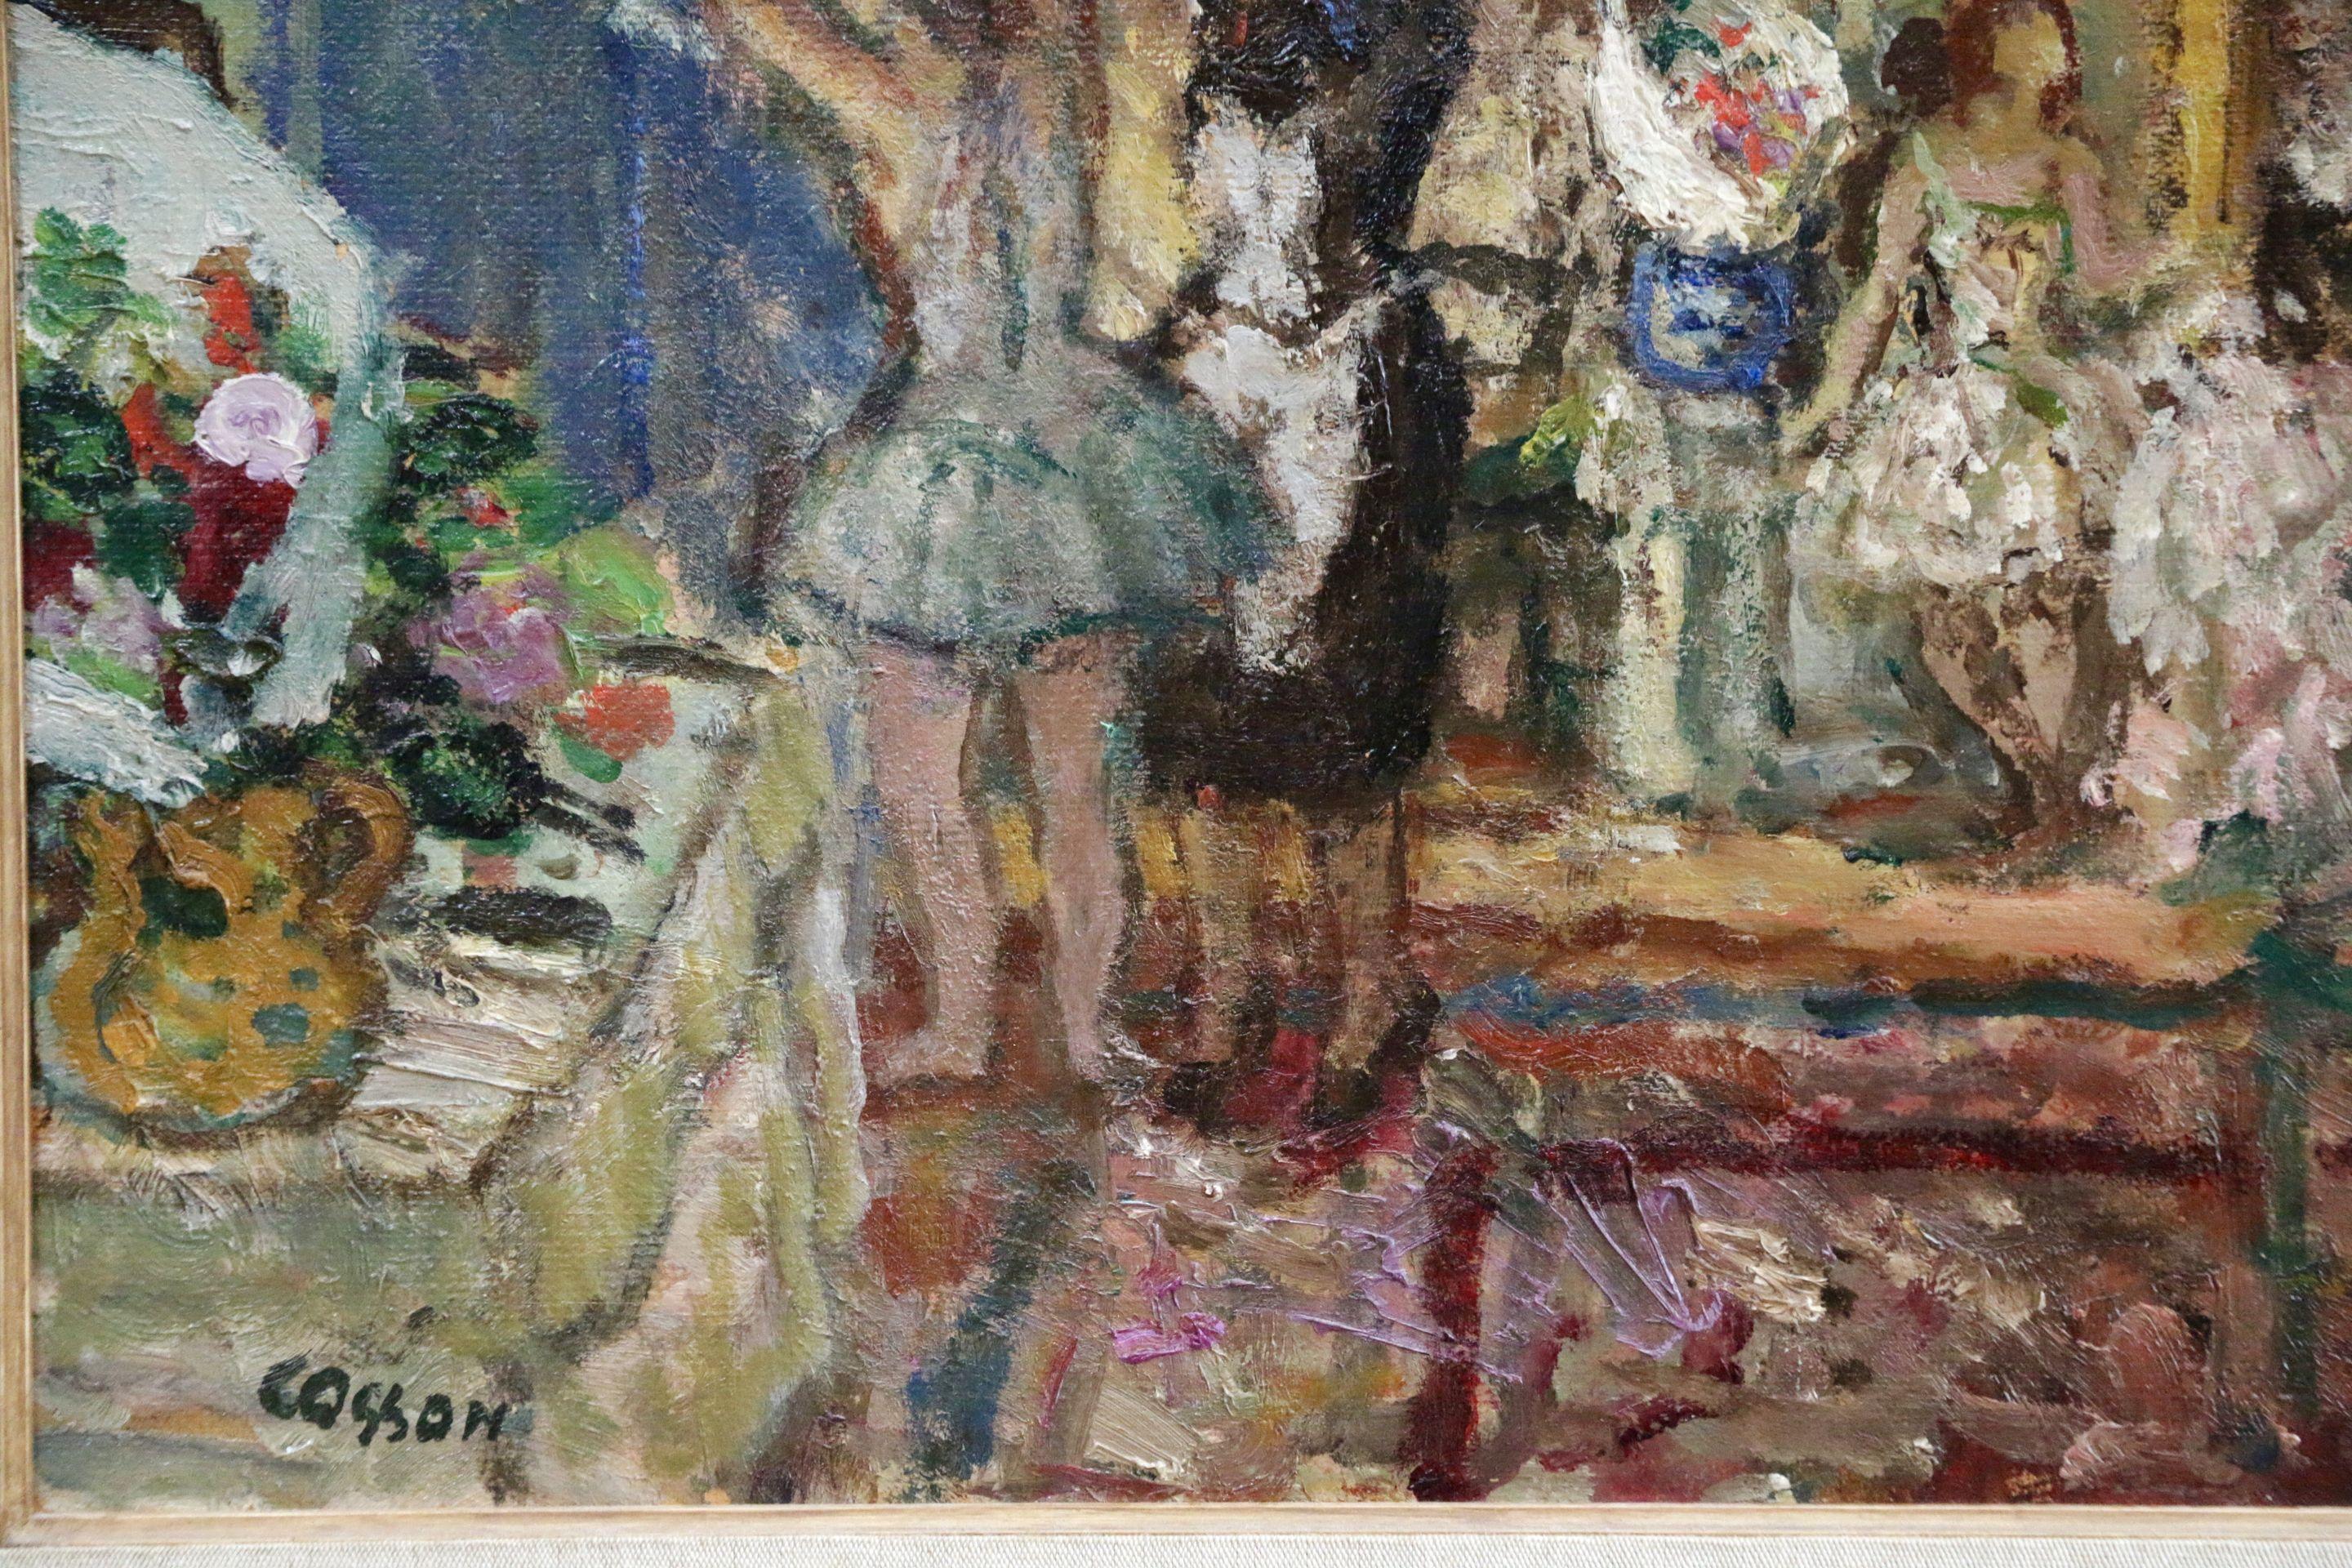 Dancers in Dressing Room - Mid 20th Century Oil, Figures in Interior by Cosson - Brown Interior Painting by Jean-Louis-Marcel Cosson